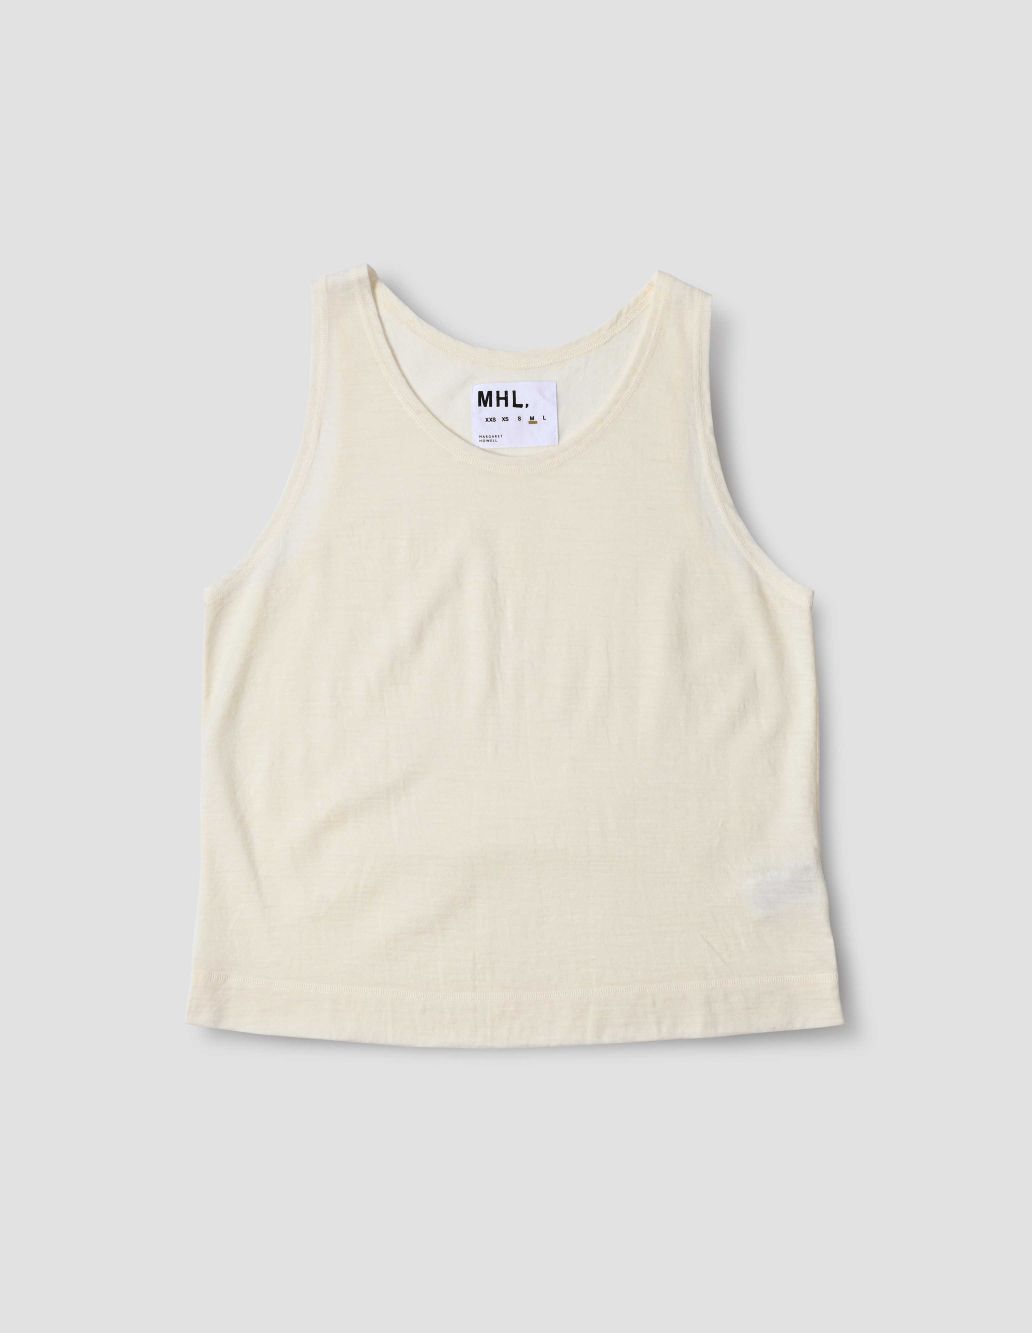 MARGARET HOWELL - Off white wool jersey thermal vest | MHL. by Margaret ...